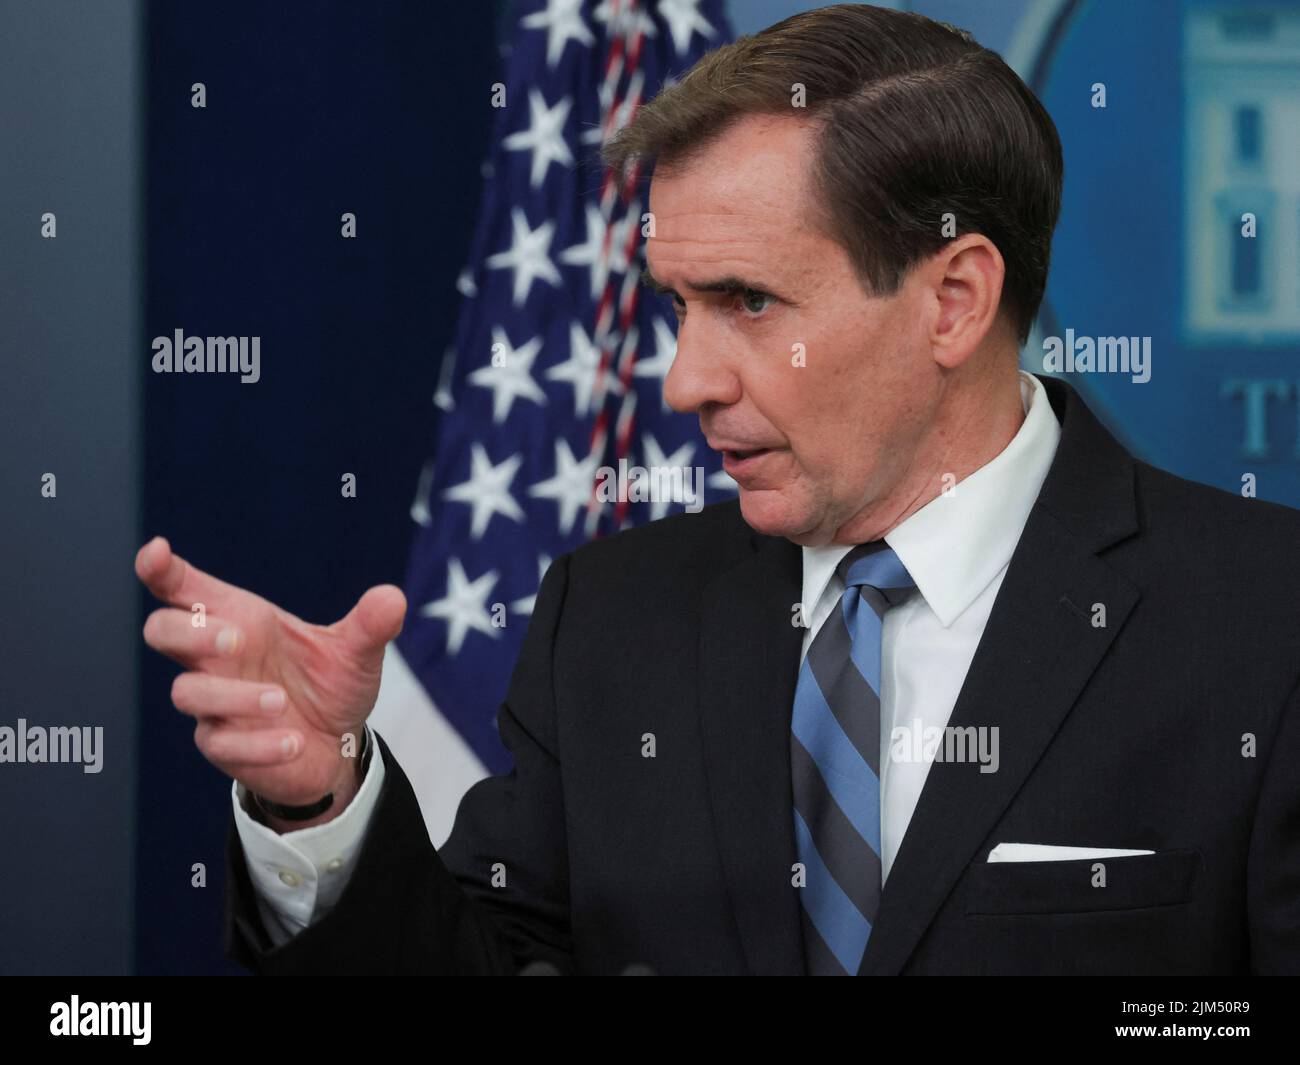 U.S. White House National Security Council Coordinator for Strategic Communications John Kirby answers a question about the conviction and sentencing of American WNBA basketball player Brittney Griner in a Russian court for drug smuggling, during a news briefing at the White House in Washington, U.S. August 4, 2022.  REUTERS/Jim Bourg Stock Photo